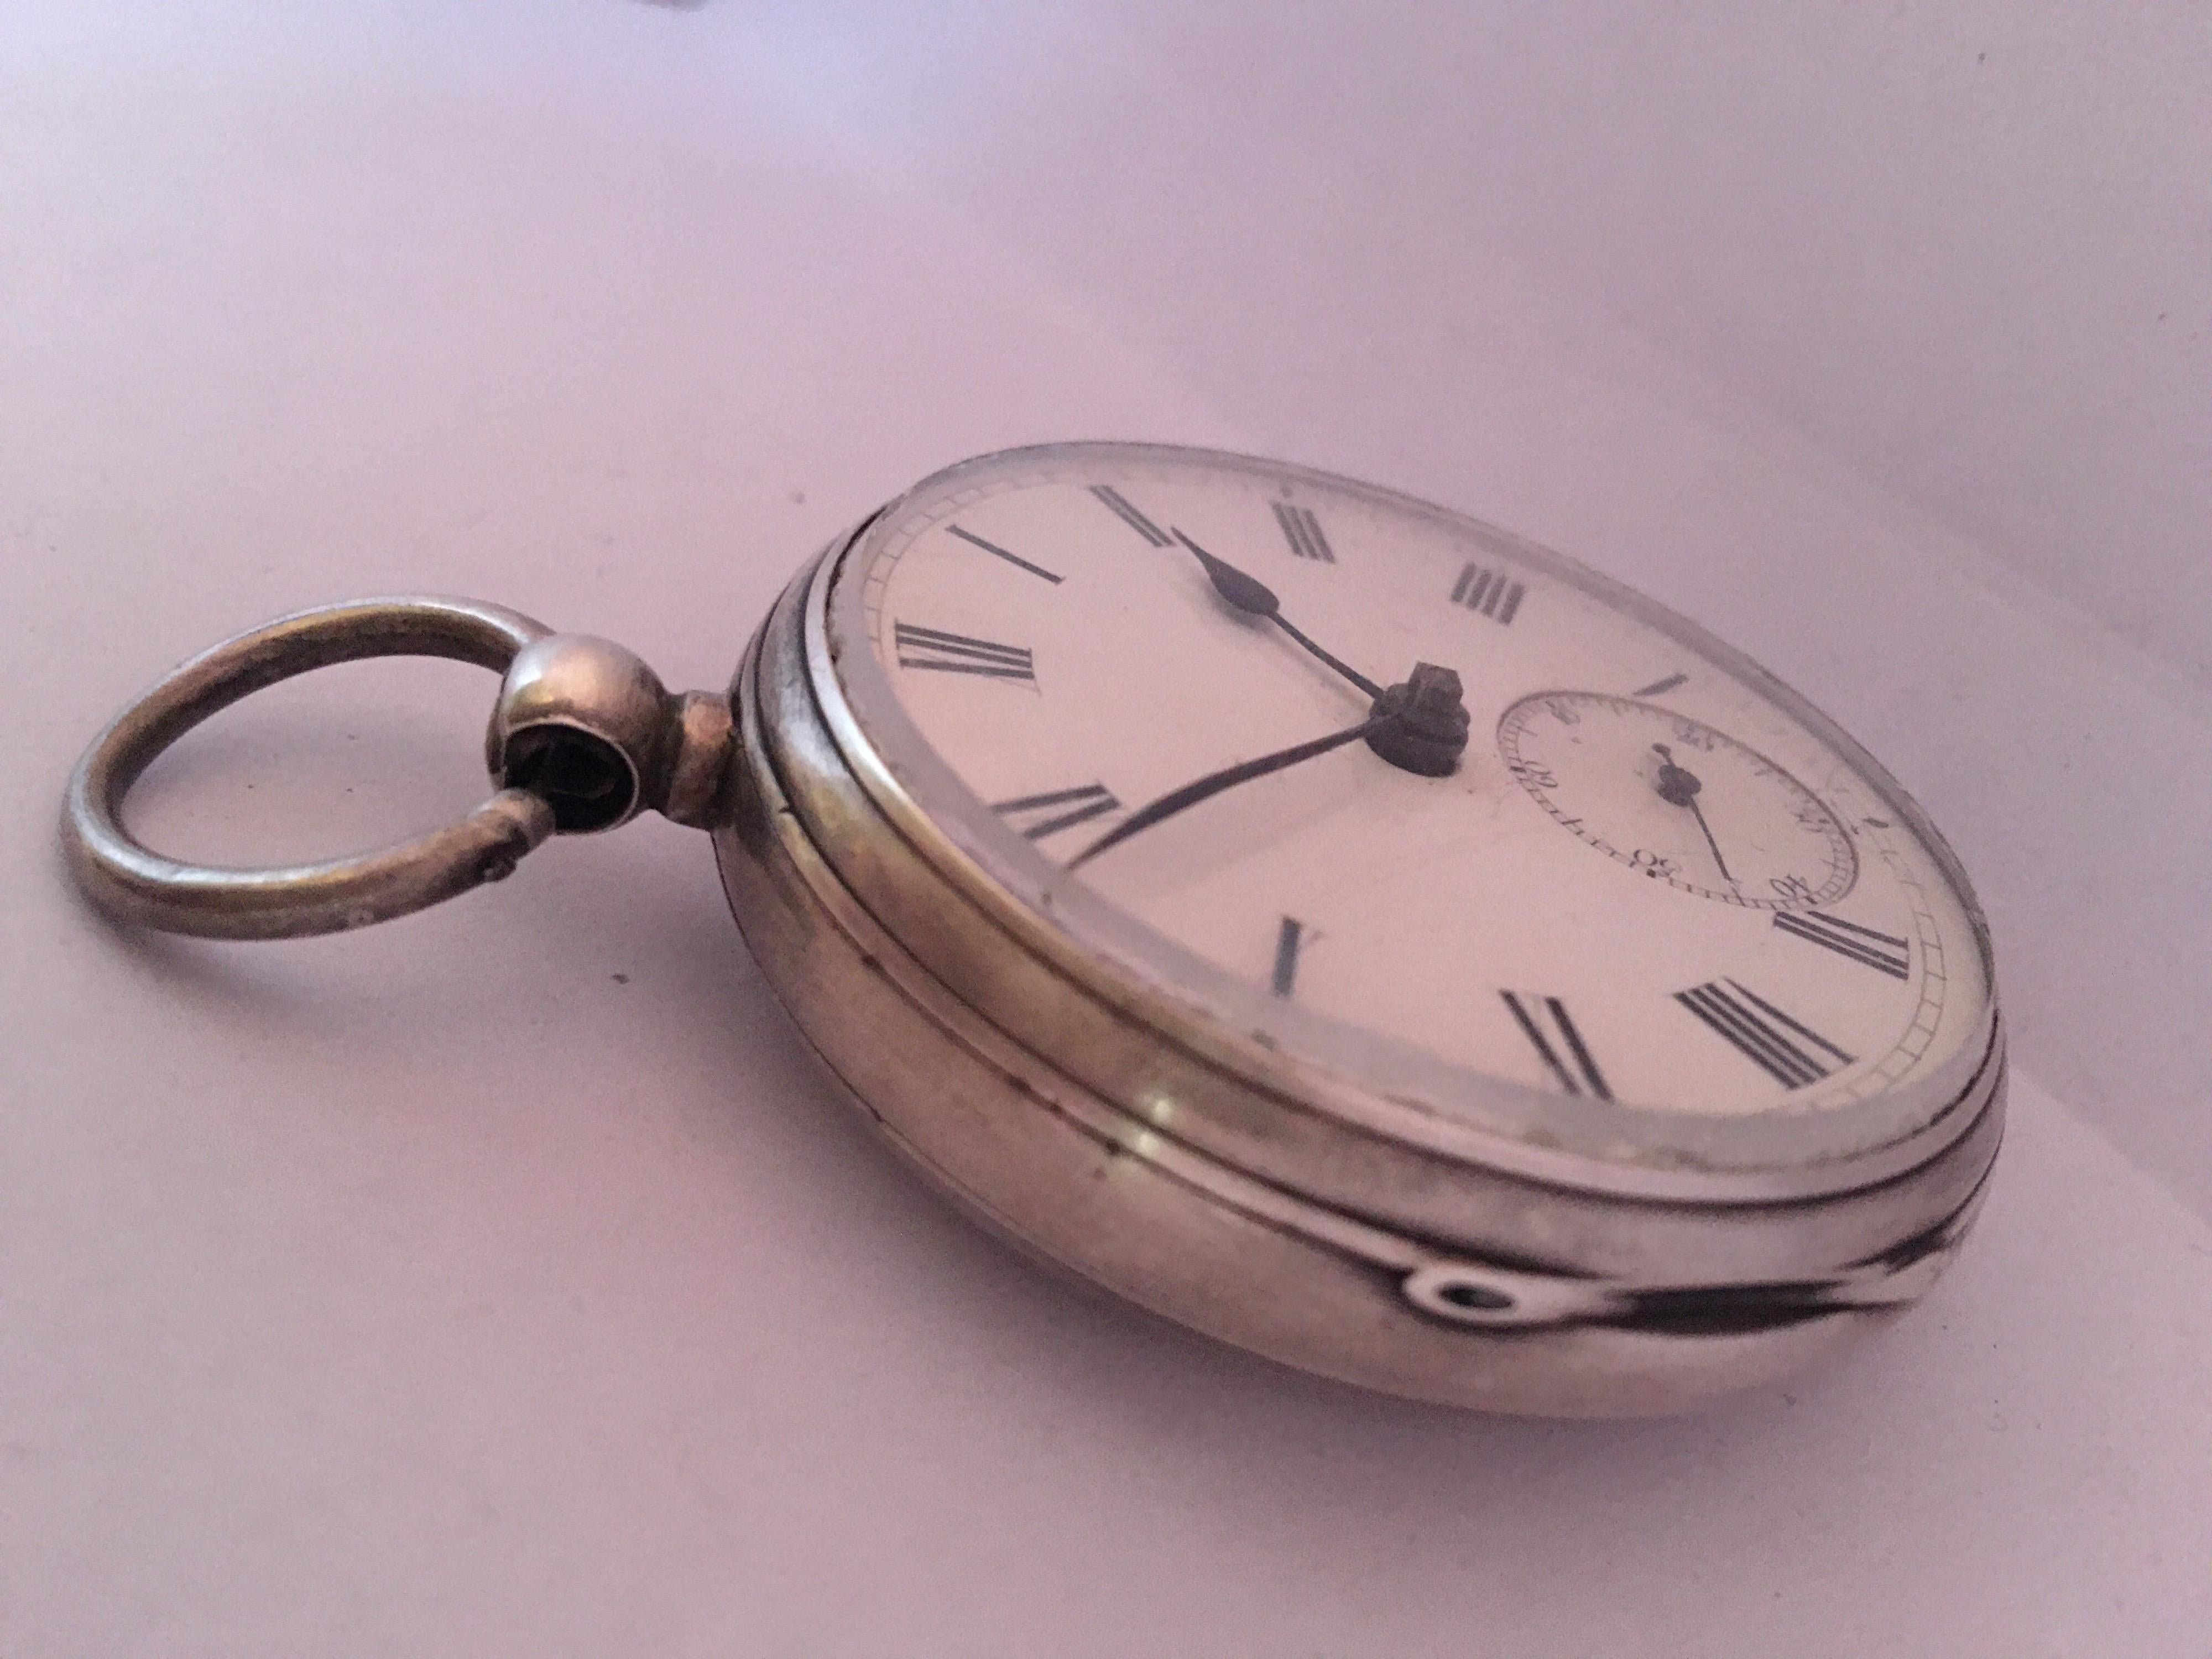 Antique Silver Key Winding Pocket Watch For Sale 11